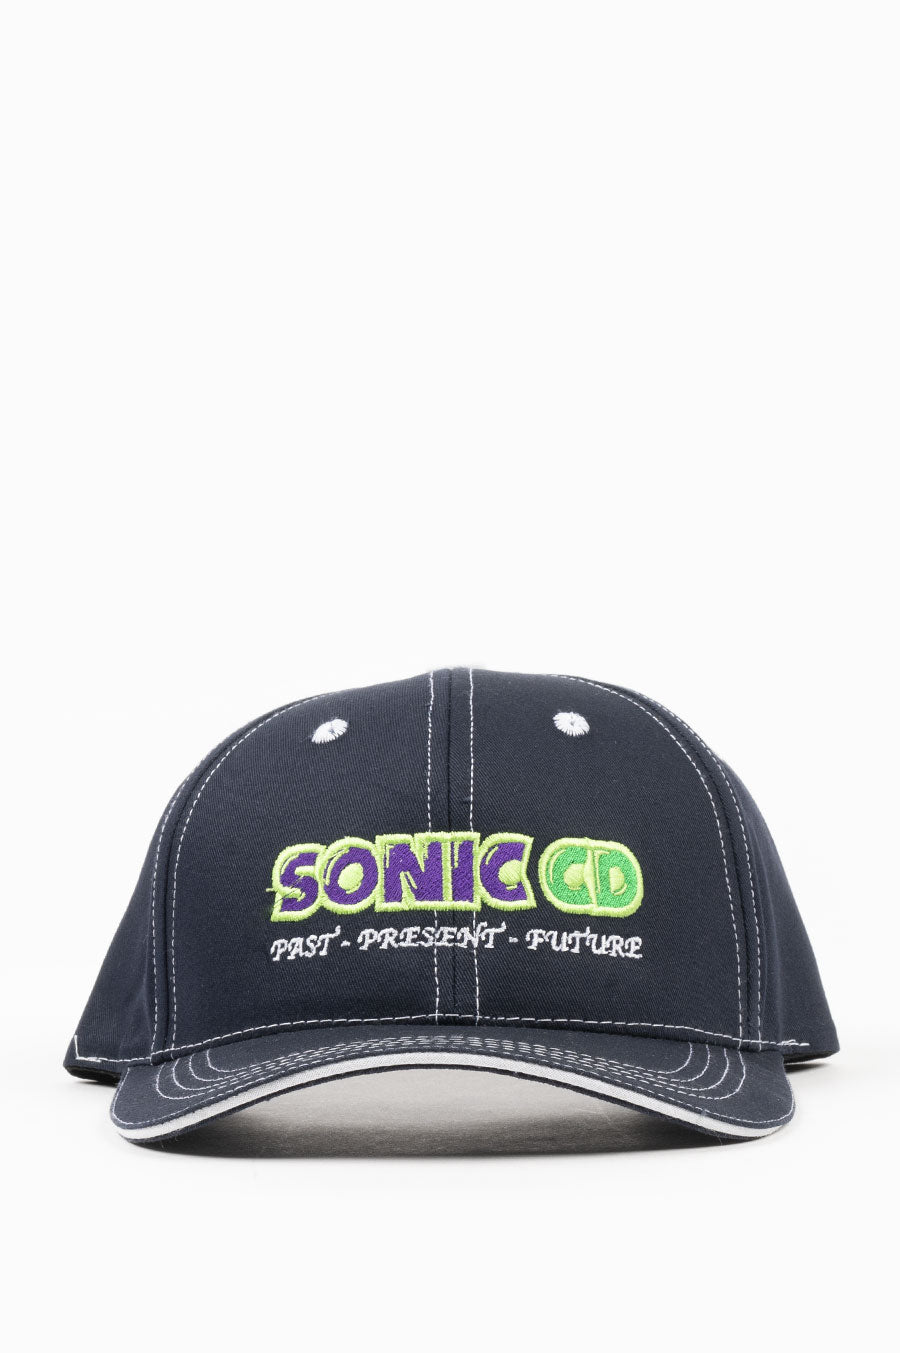 STRAY RATS X SONIC THE HEDGEHOG SONIC CD HAT NAVY